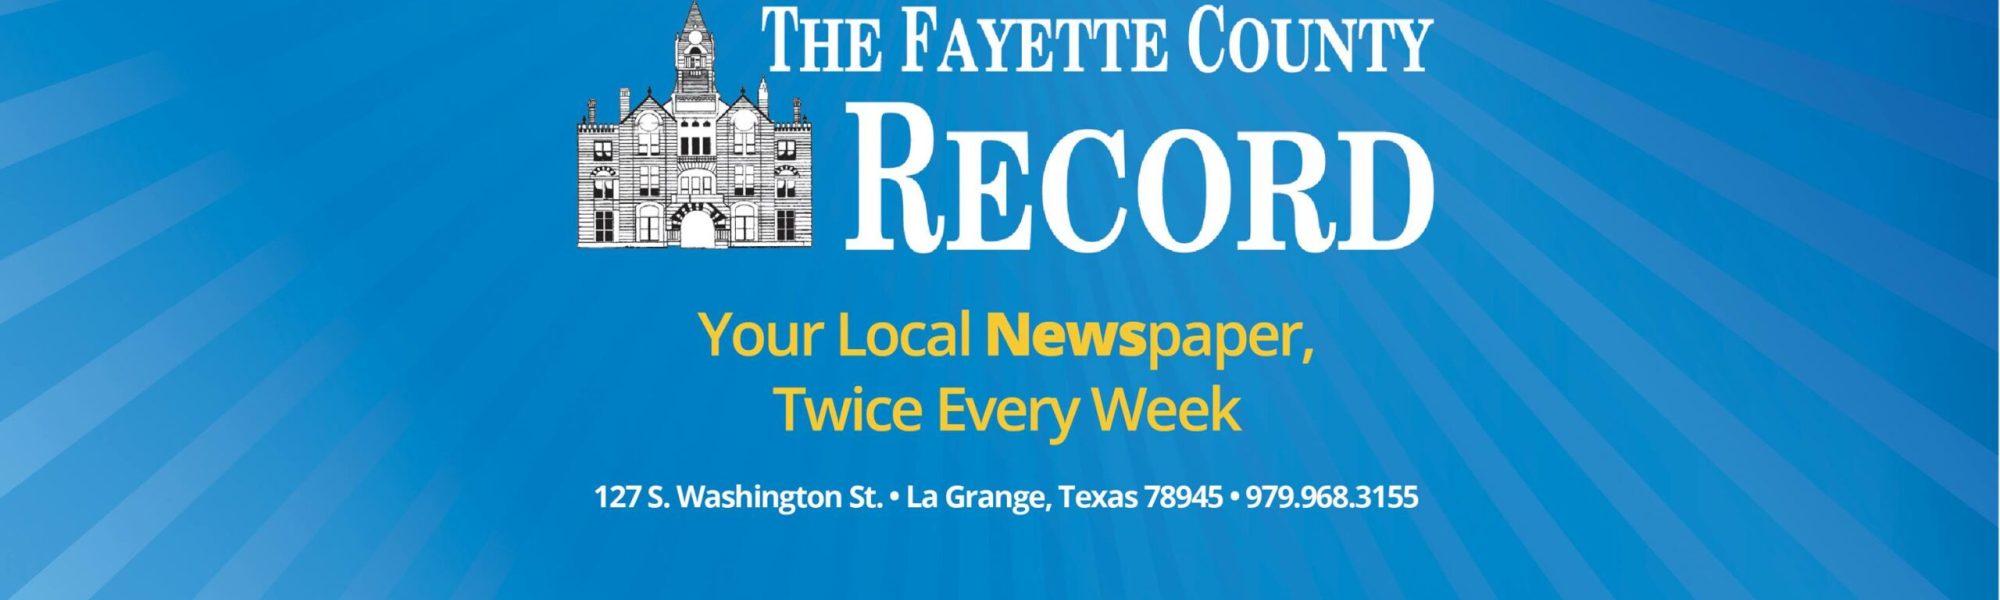 Local Natural Gas Customers to See Monthly Rate Increase | The Fayette County Record